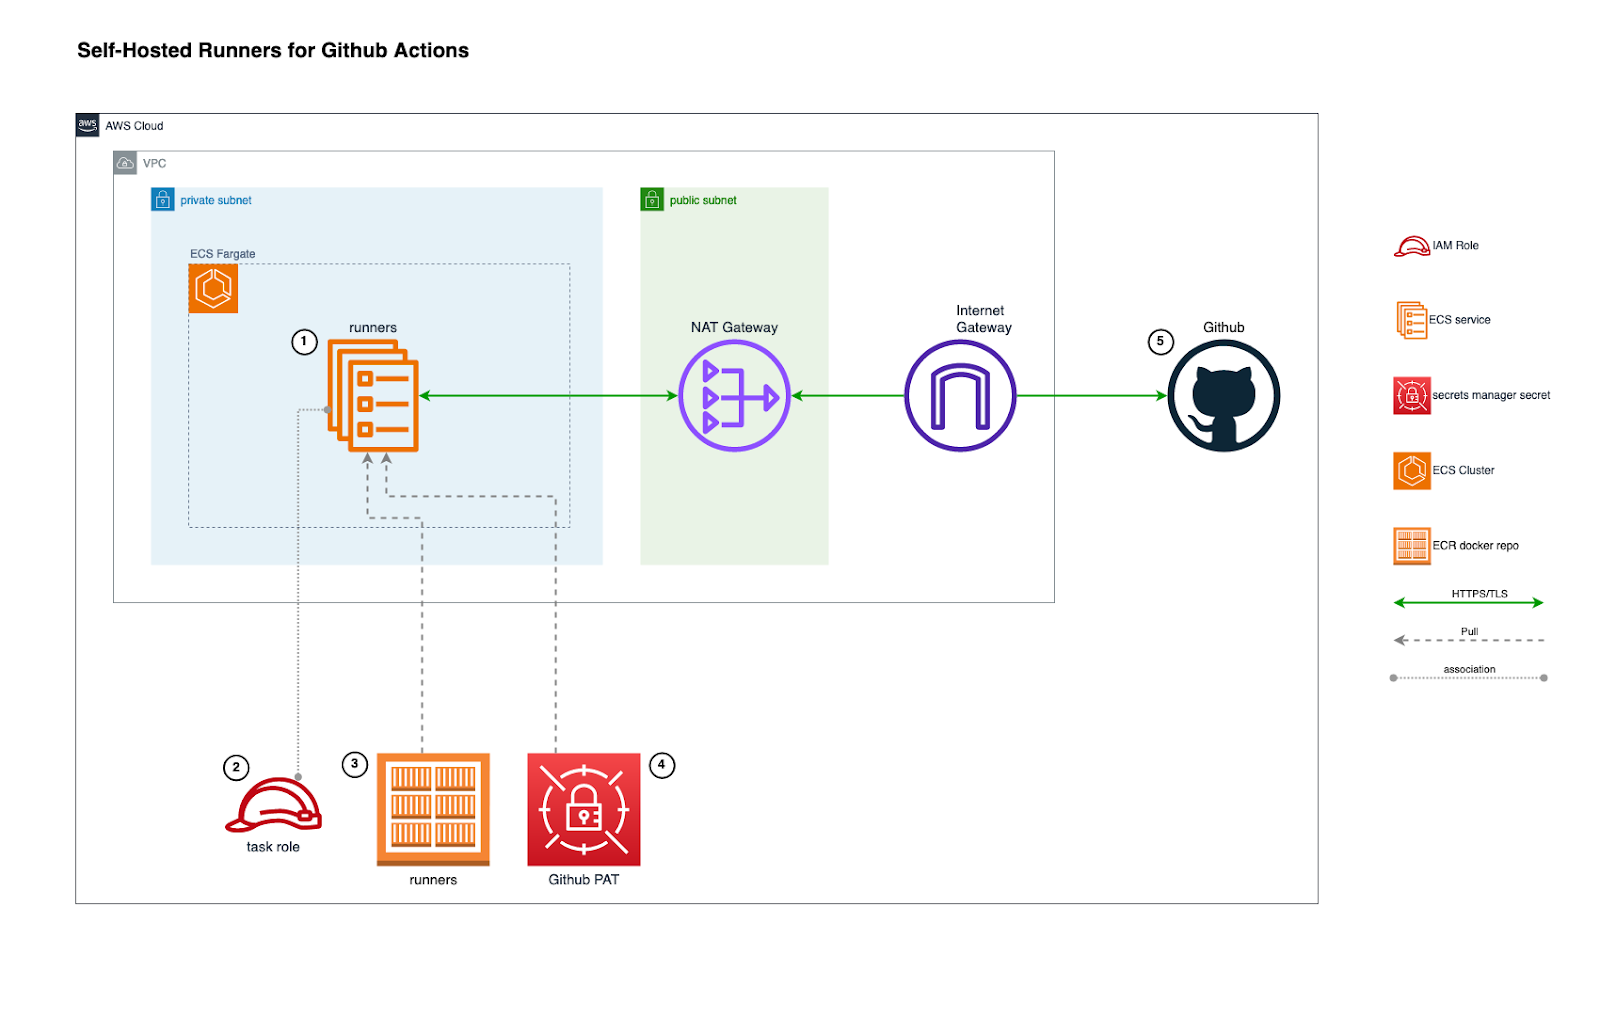 AWS architecture diagram showing self hosted runners as an Amazon ECS service placed in a private subnet